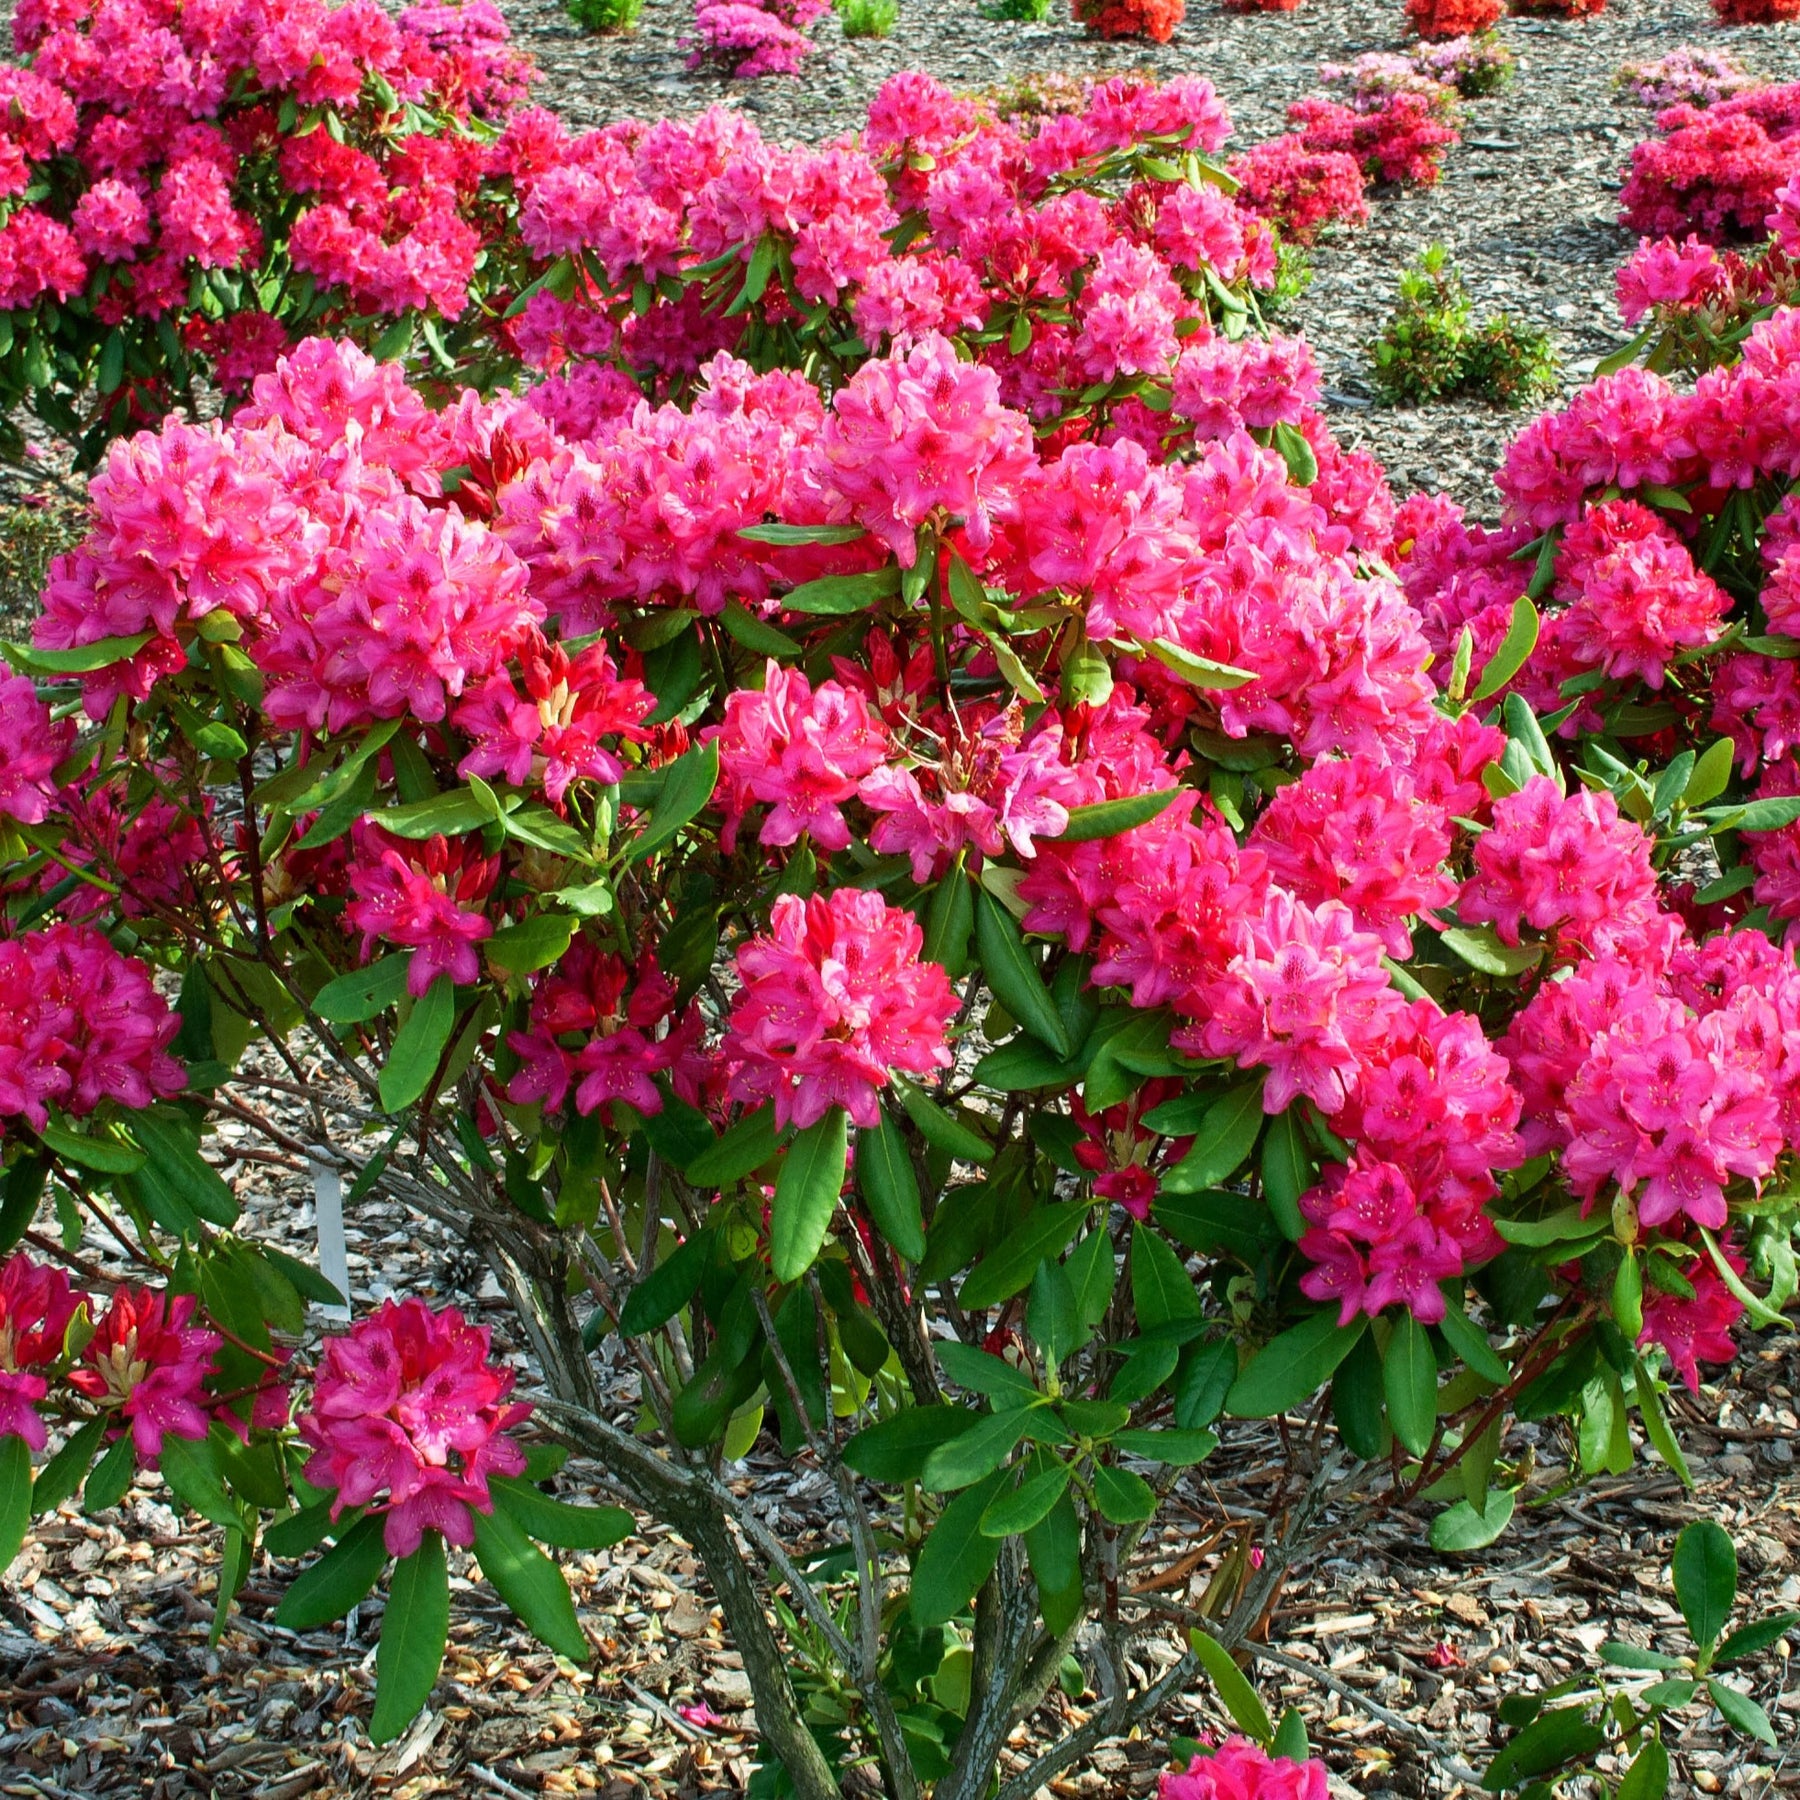 Rhododendron Nova Zembla - Rhododendron Nova Zembla - Rhododendrons